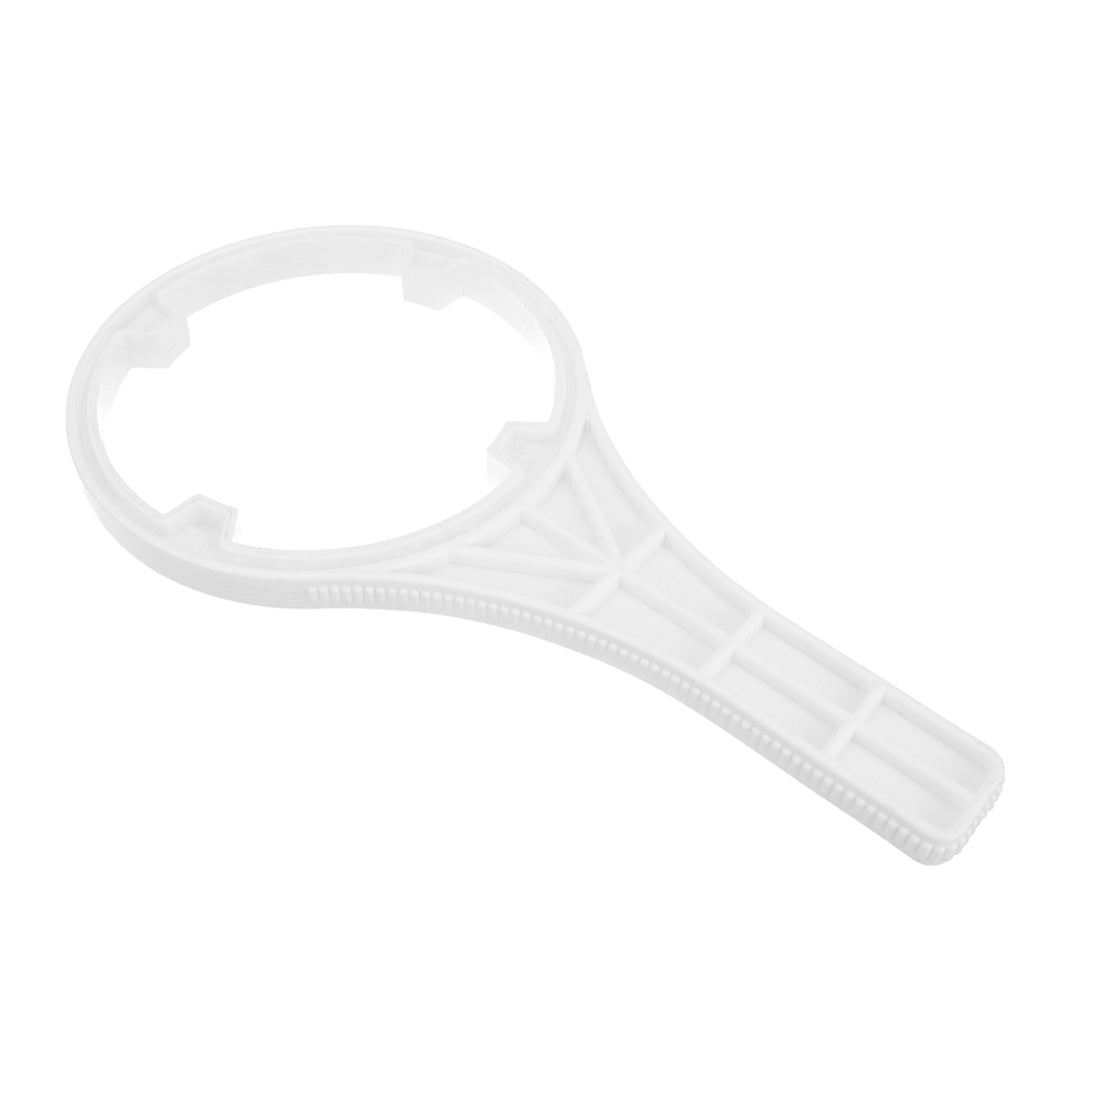 XERO Filter Wrench - Small - Handle Oblique View